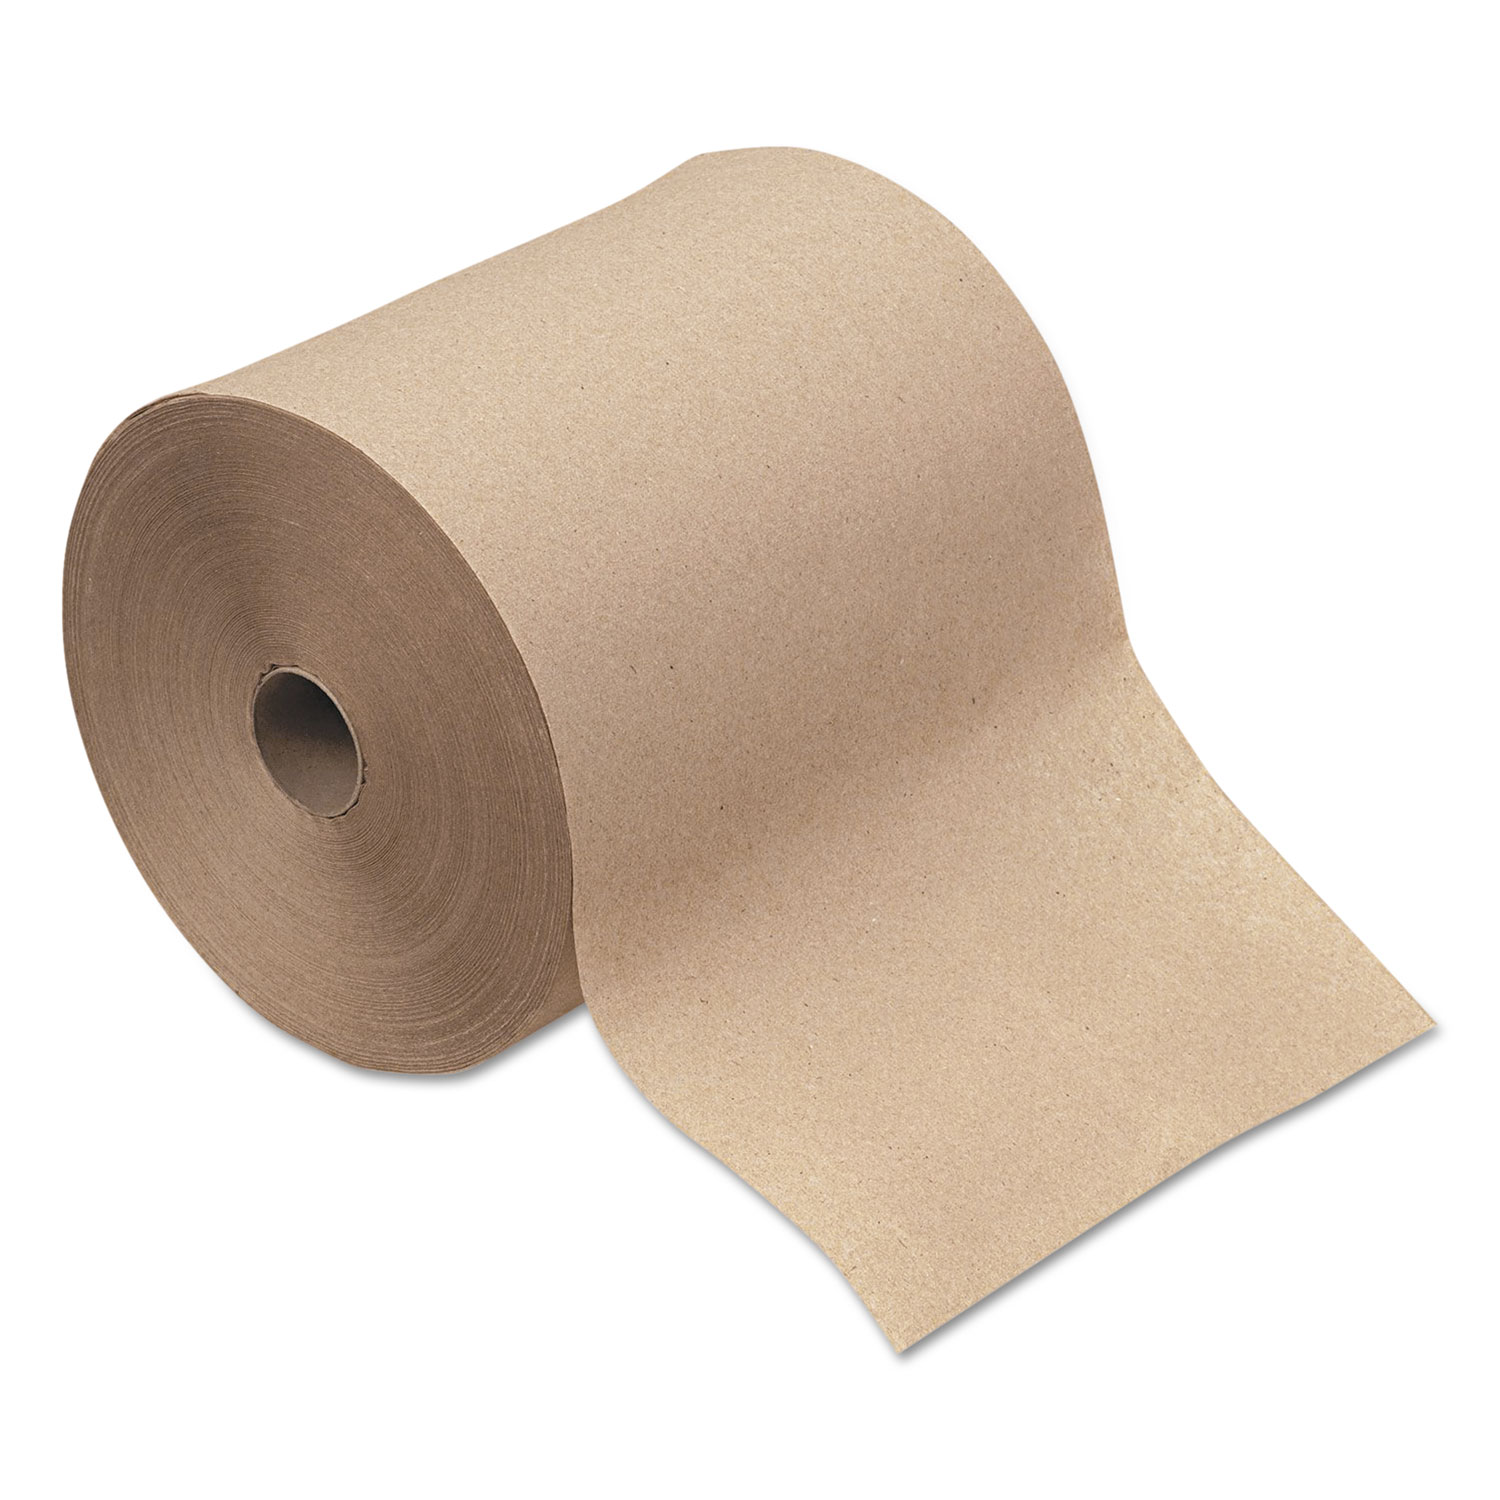 Hardwound Roll Towels, 1-Ply, Natural, 8 x 600 ft, 12 Rolls/Carton